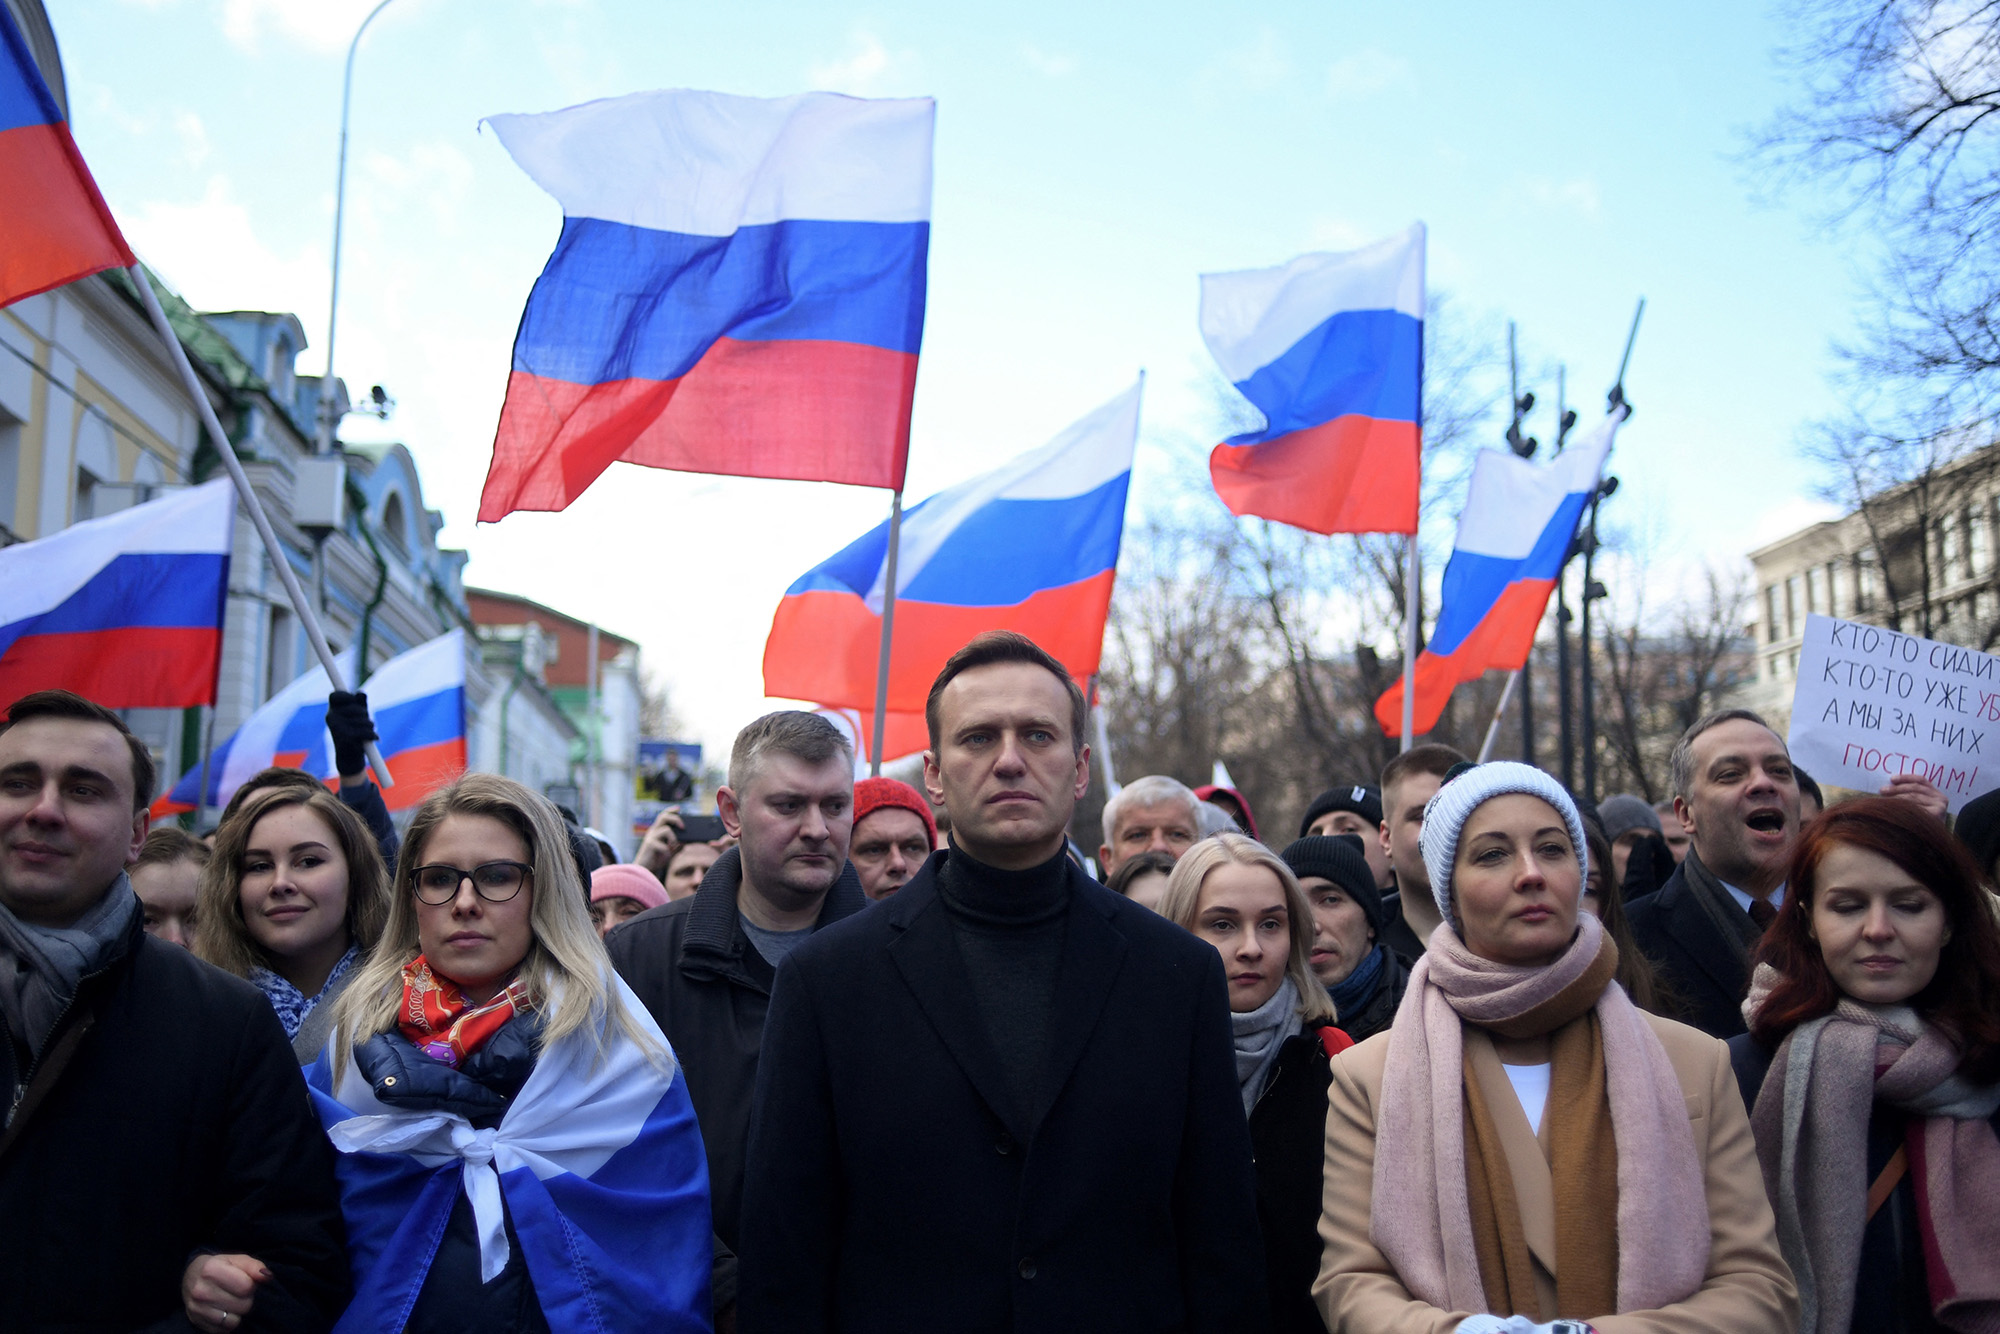 Alexei Navalny, center, his wife Yulia, center right, and other protesters march in memory of slain Kremlin critic Boris Nemtsov in central Moscow, Russia, on February 29, 2020.